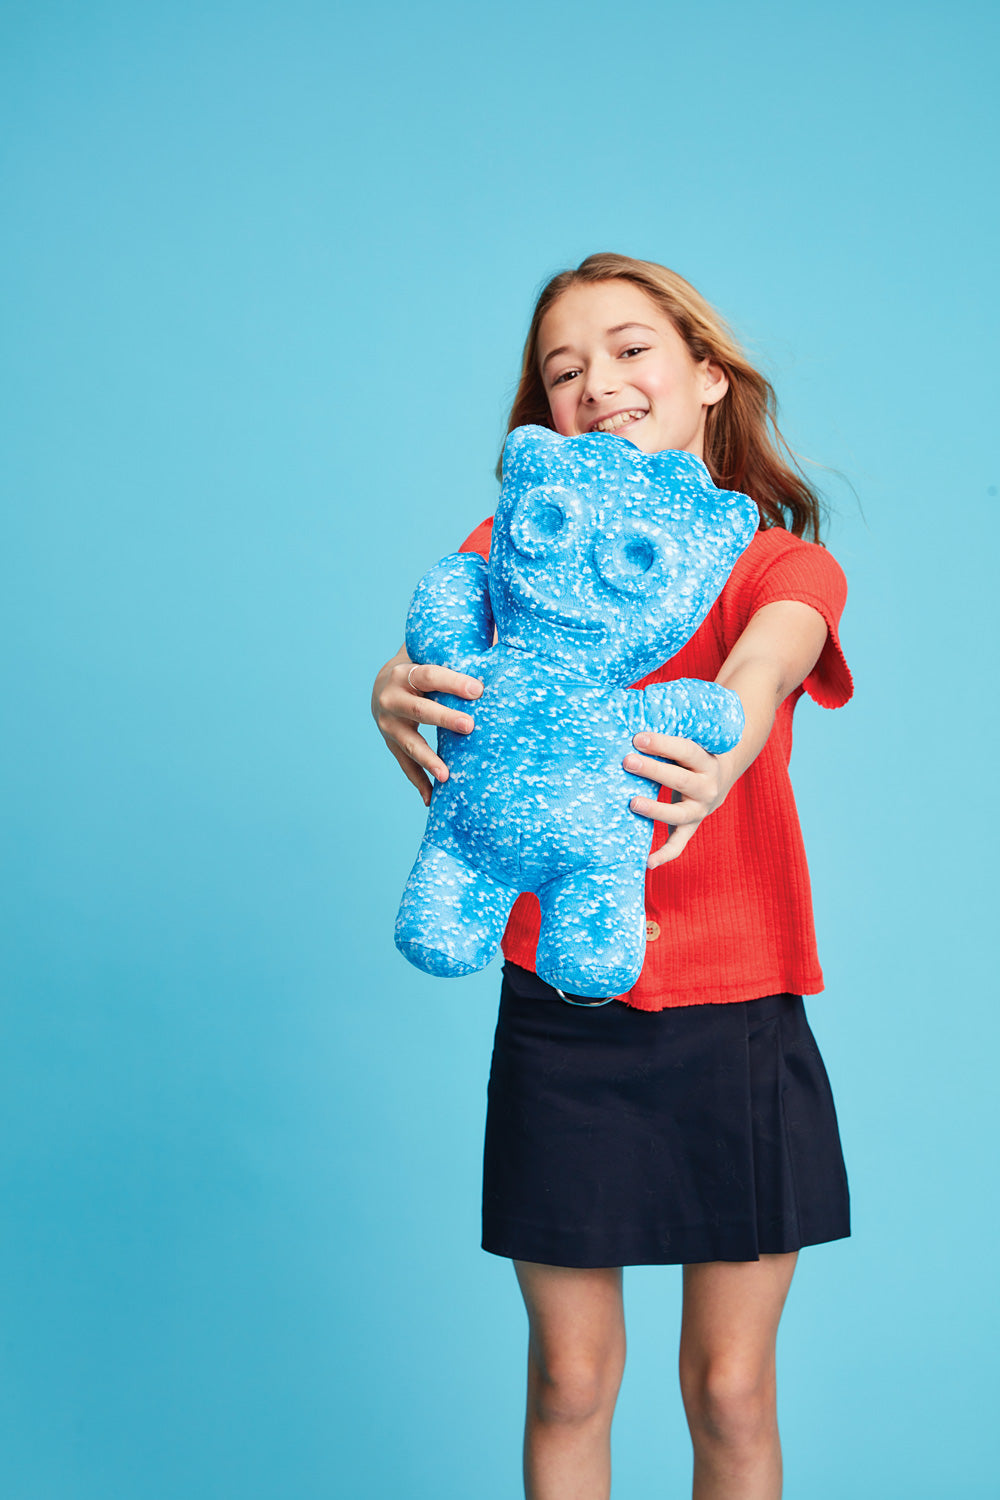 Sour Patch Kid Blue Large Plush by Iscream #780-1555M